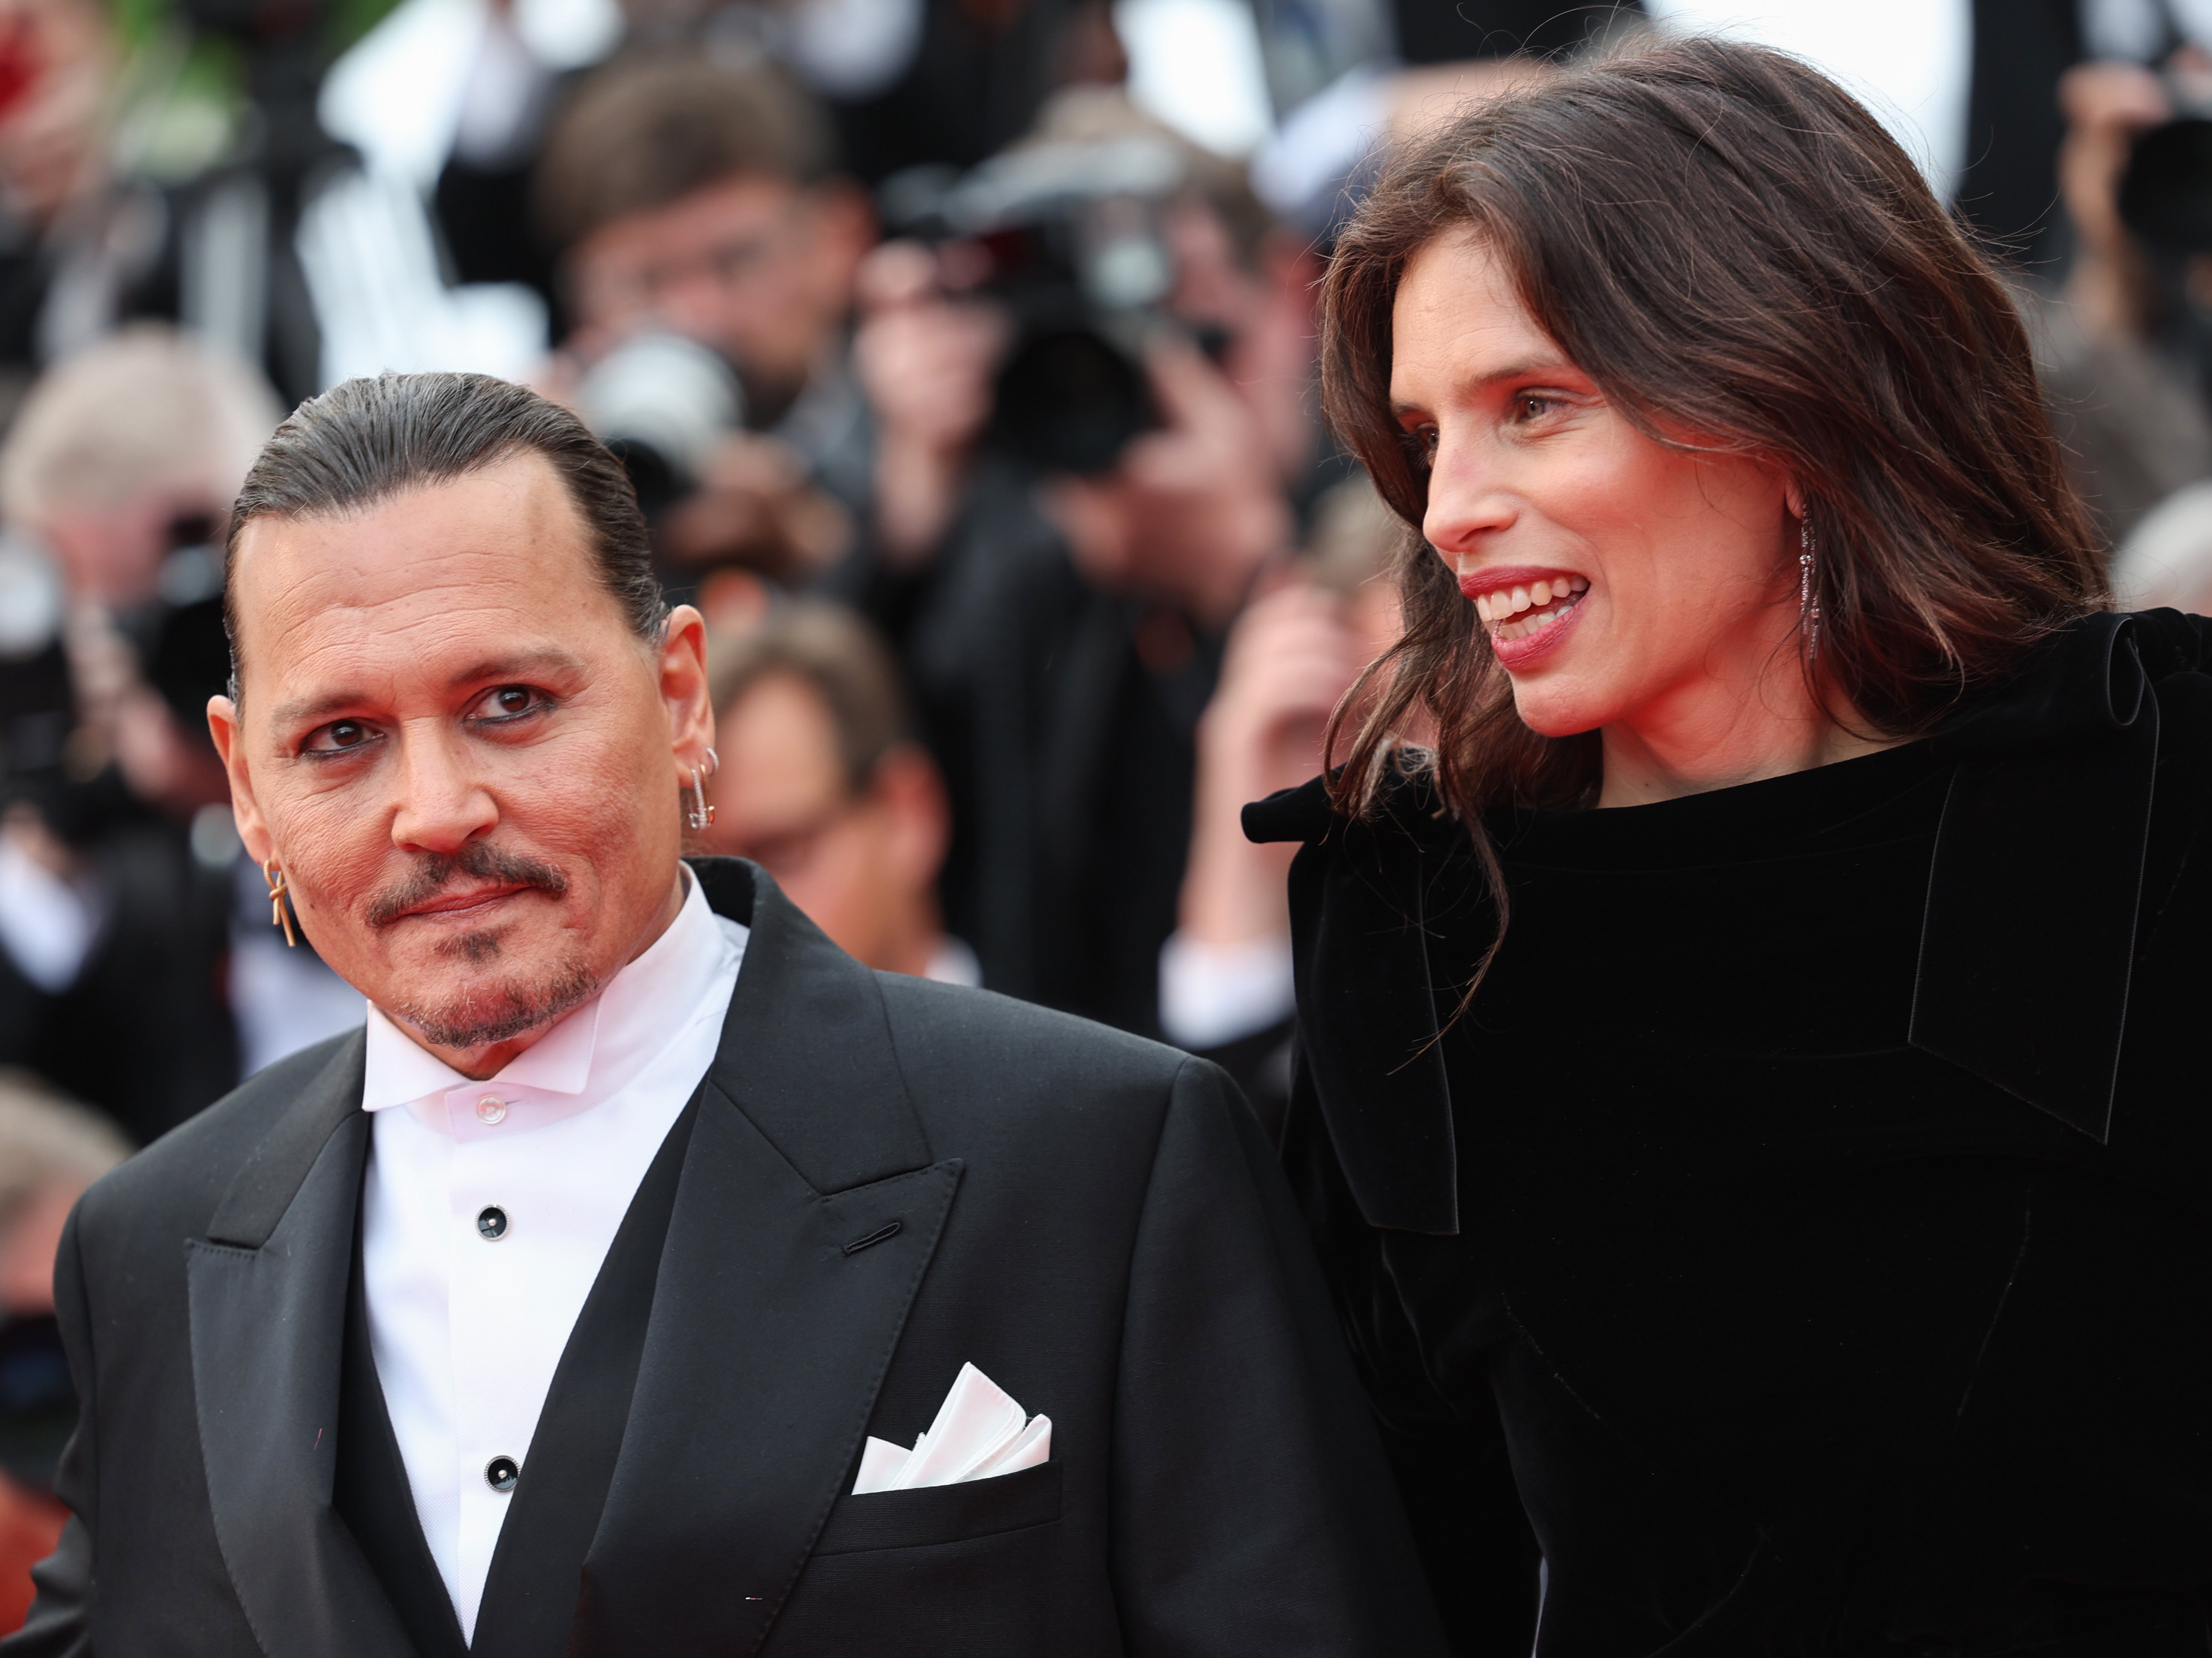 Johnny Depp and Maïwenn attend the ‘Jeanne du Barry’ screening and opening ceremony red carpet at the 76th annual Cannes film festival